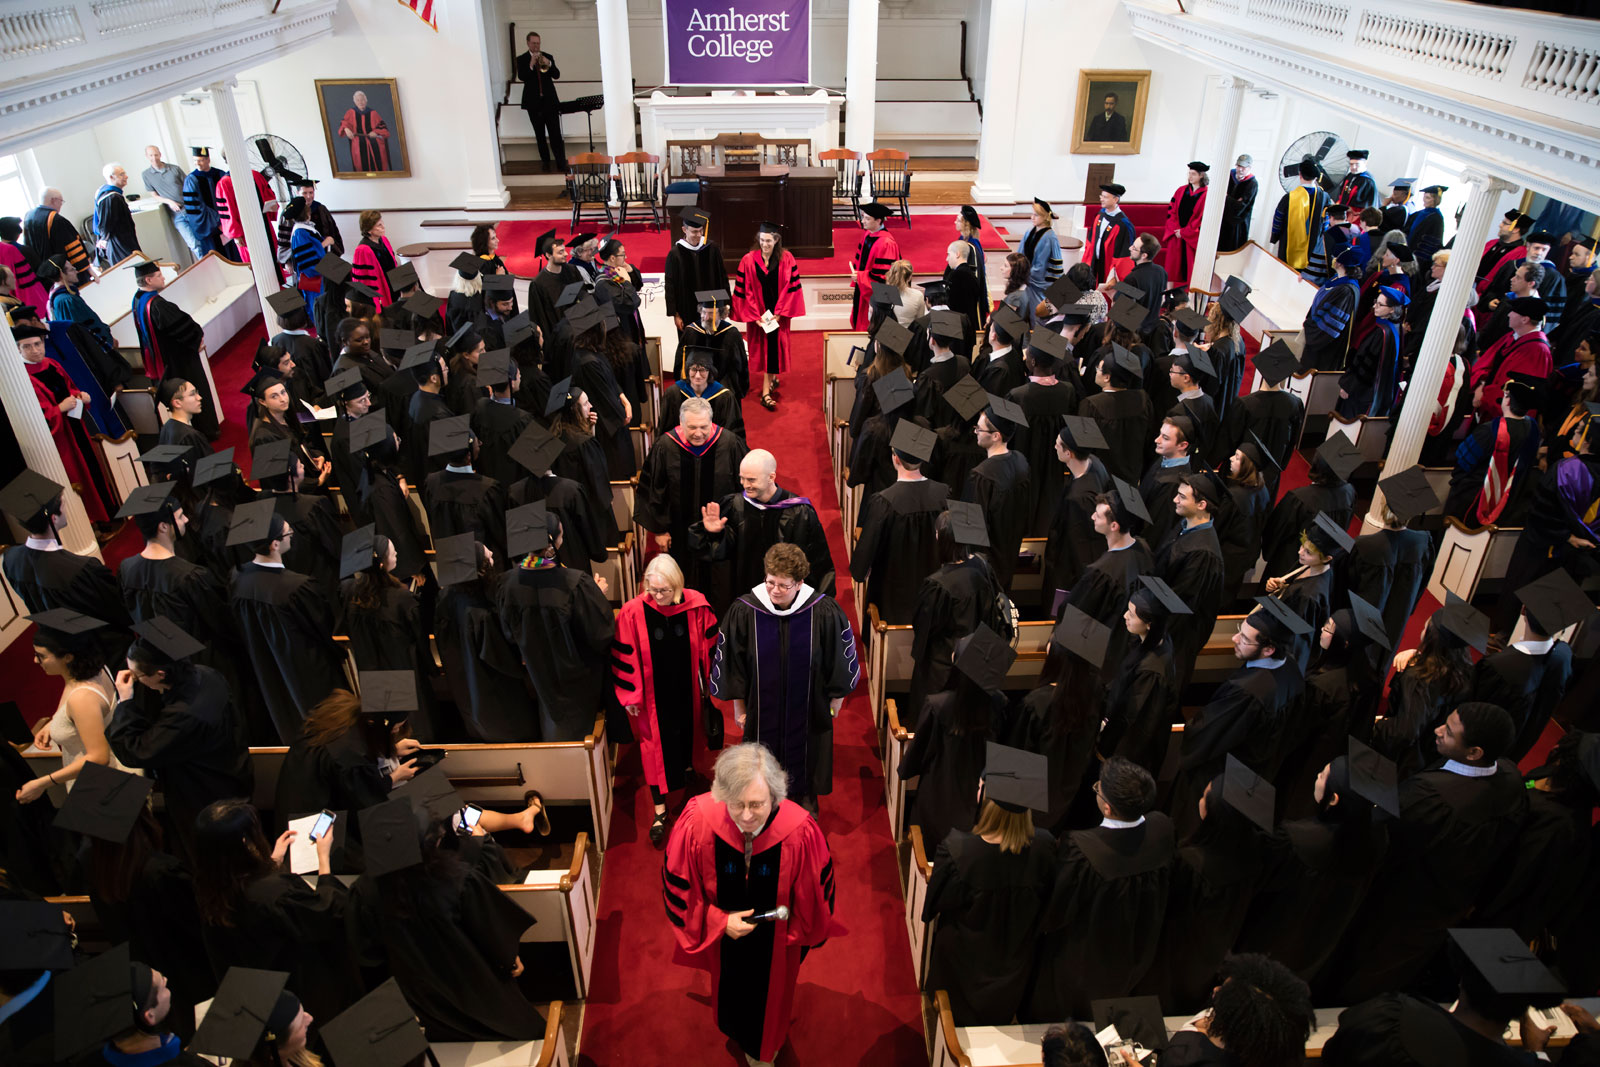 The procession of faculty enters Johnson Chapel, broader view